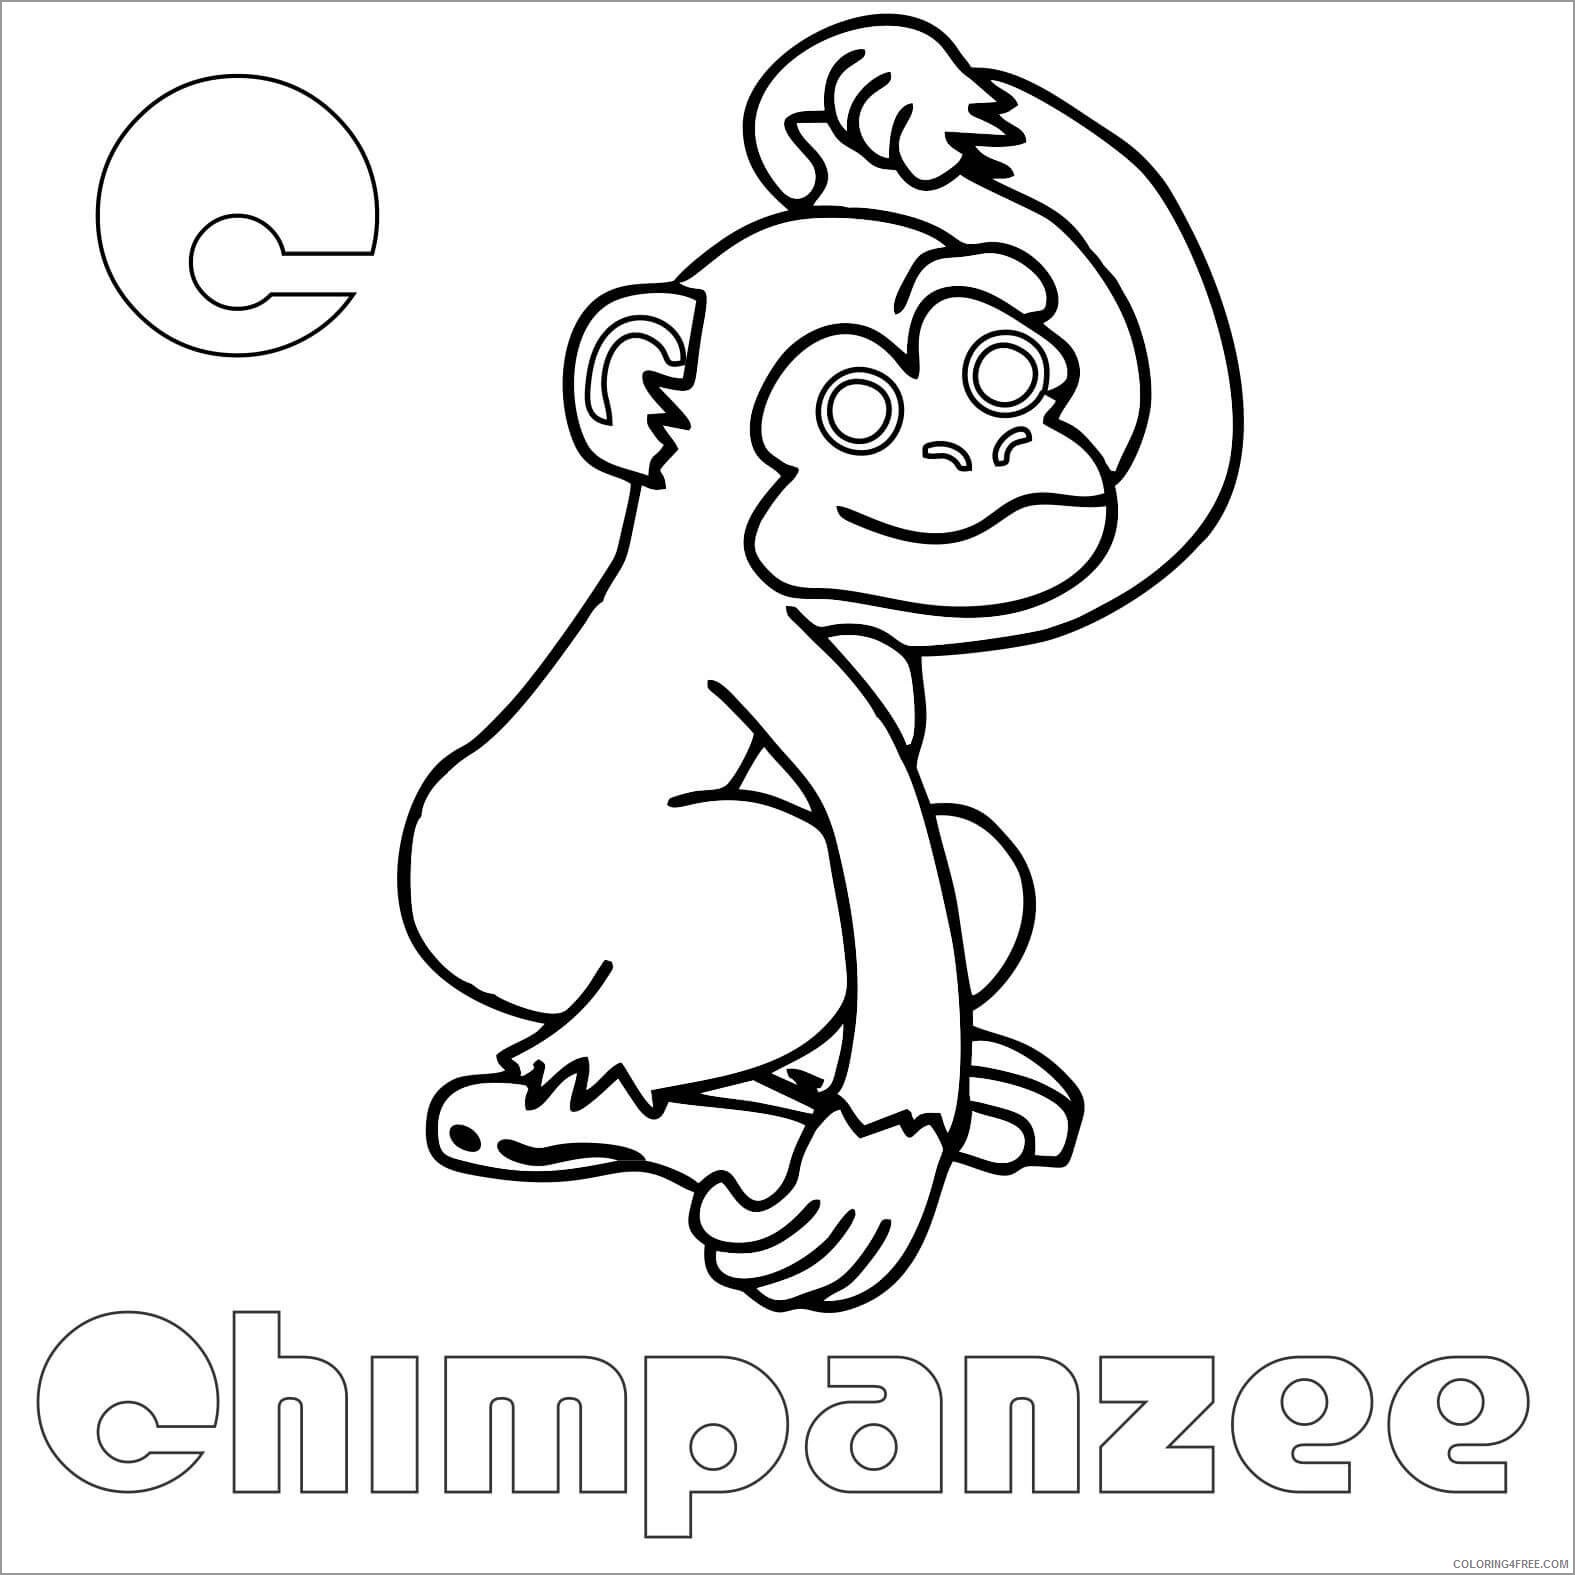 Chimpanzee Coloring Pages Animal Printable Sheets c for chimpanzee 2021 1075 Coloring4free